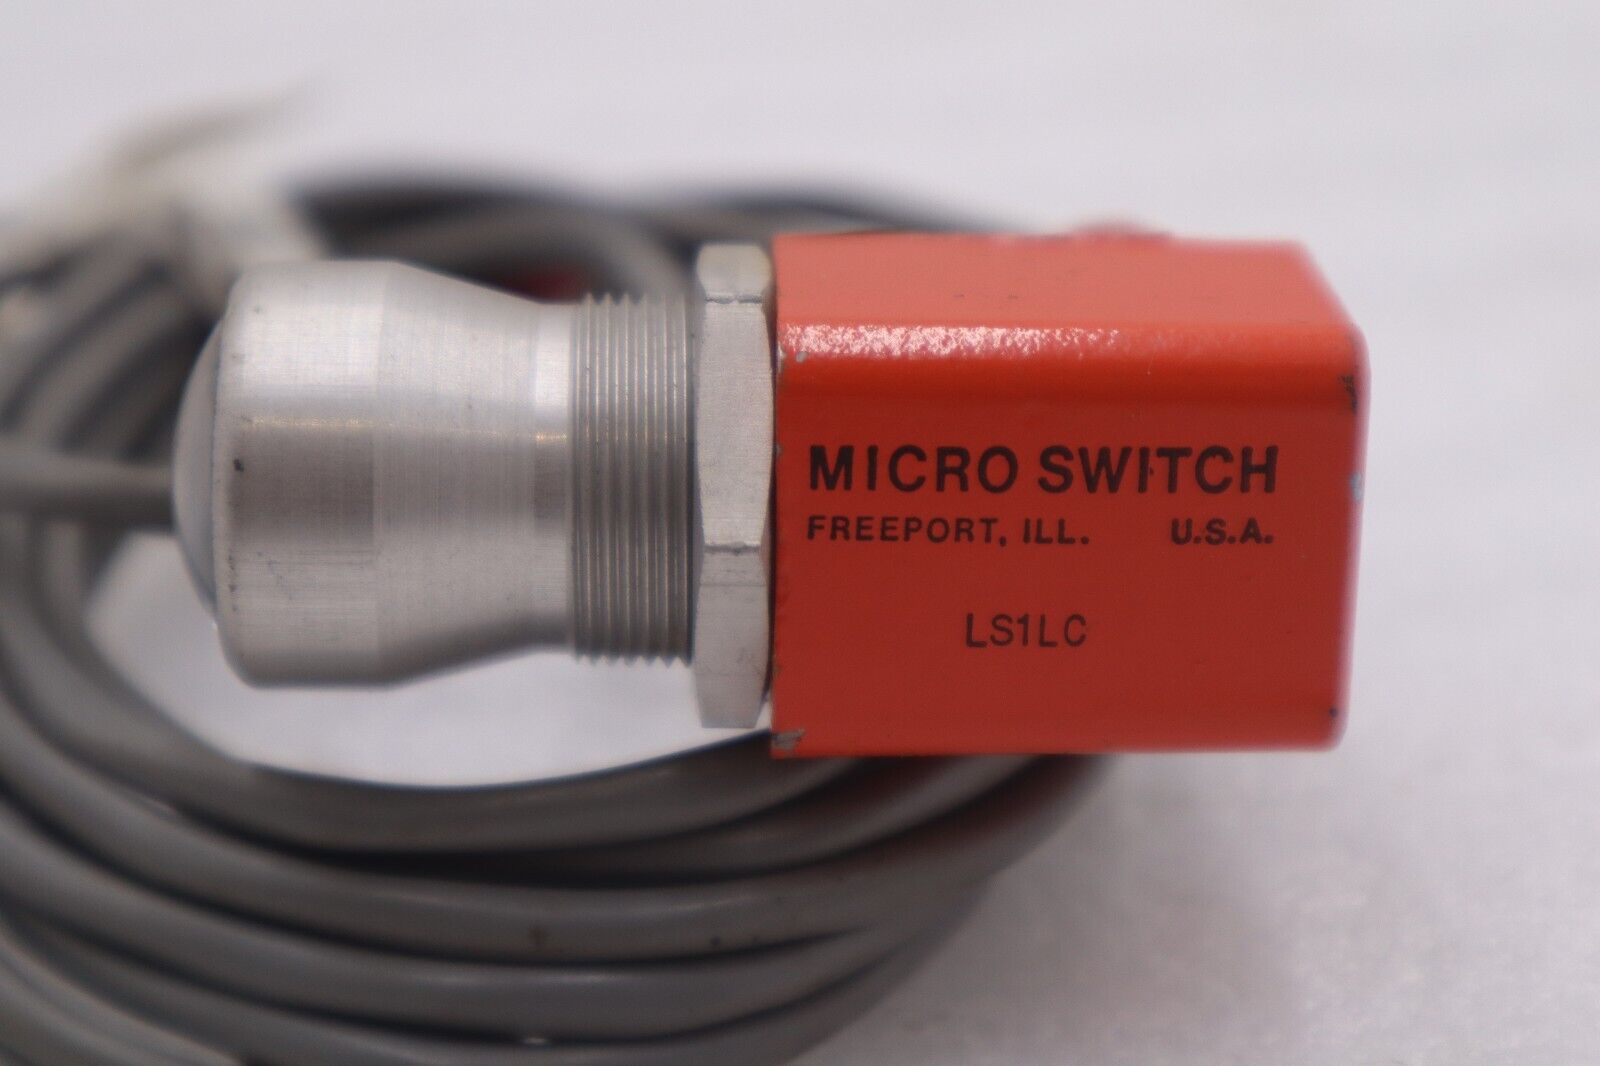 NEW OLD STOCK MICROSWITCH FE-LS1LC STOCK K-3664